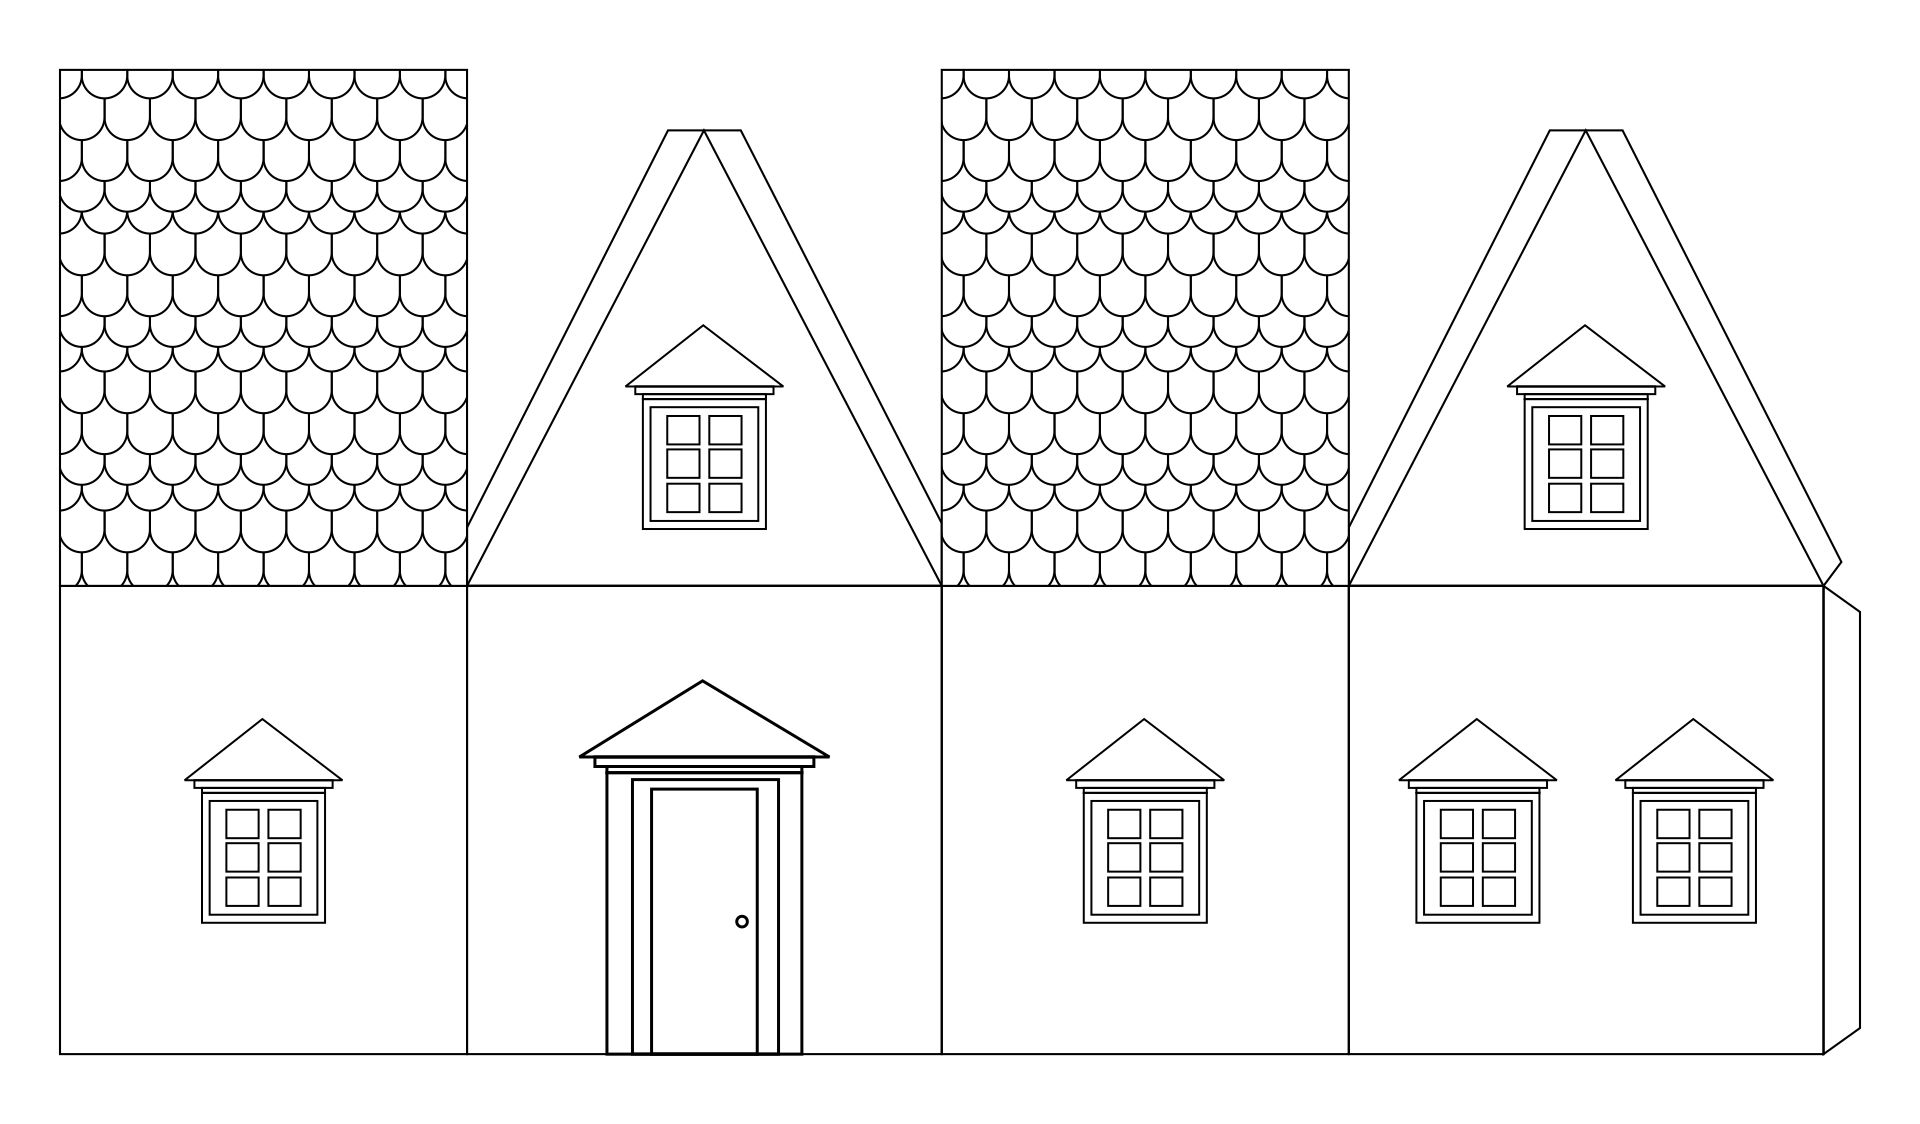 Printable Paper House Craft Templates